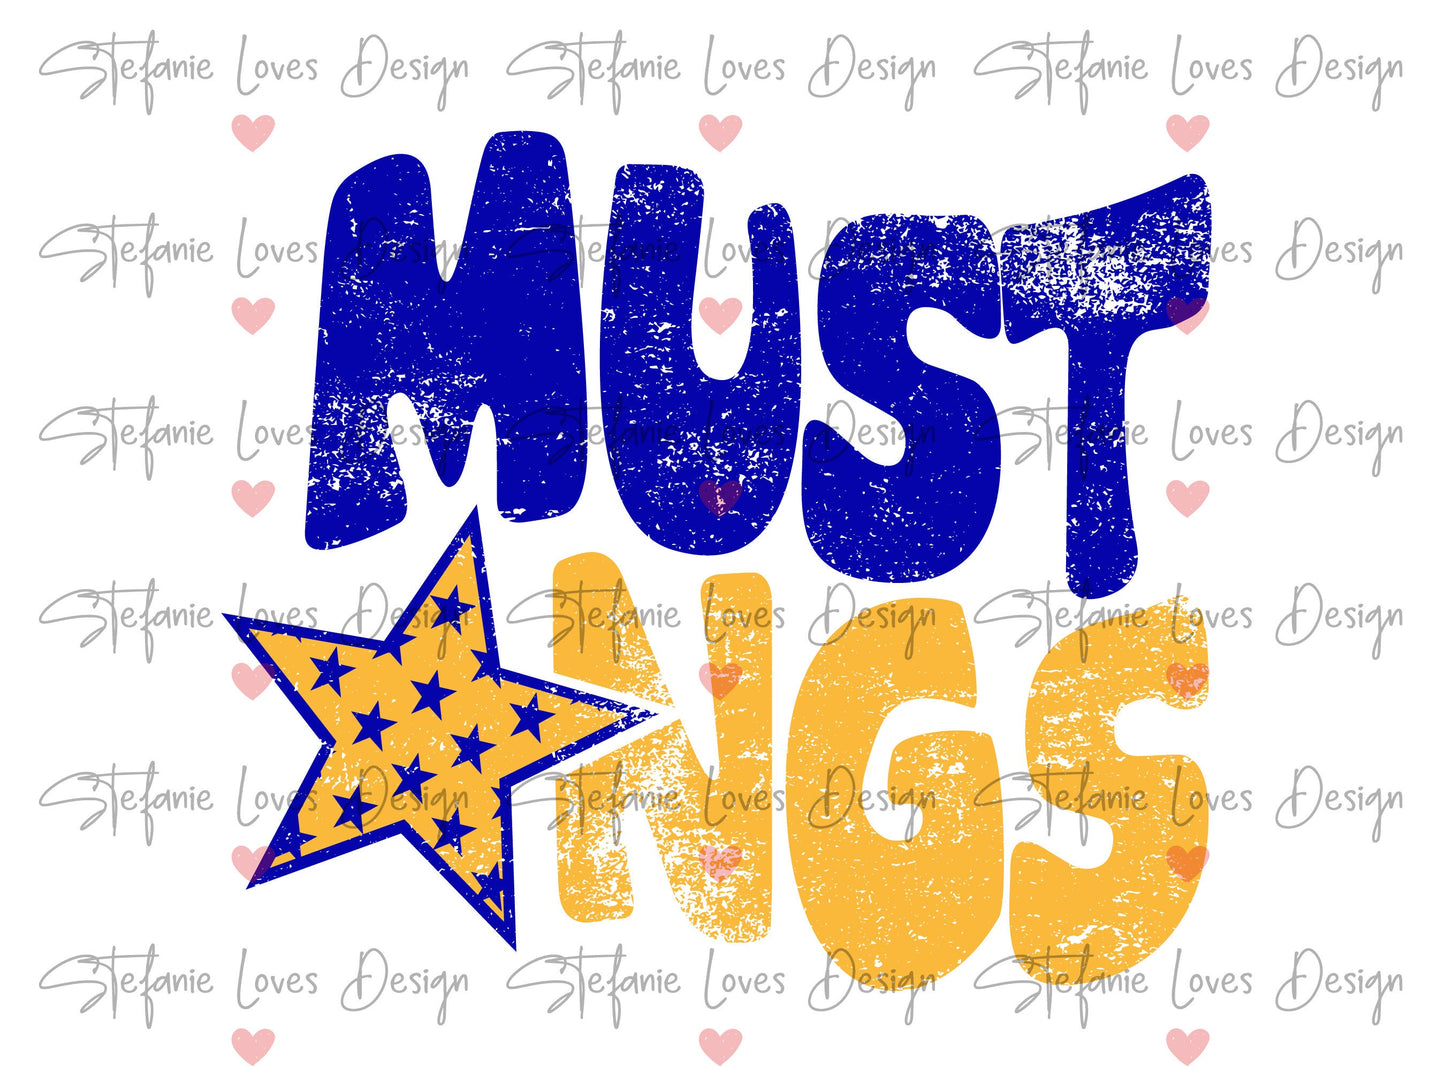 Mustangs Distressed Star PNG, Mustangs png, Retro Letter Digital Design royal and yellow